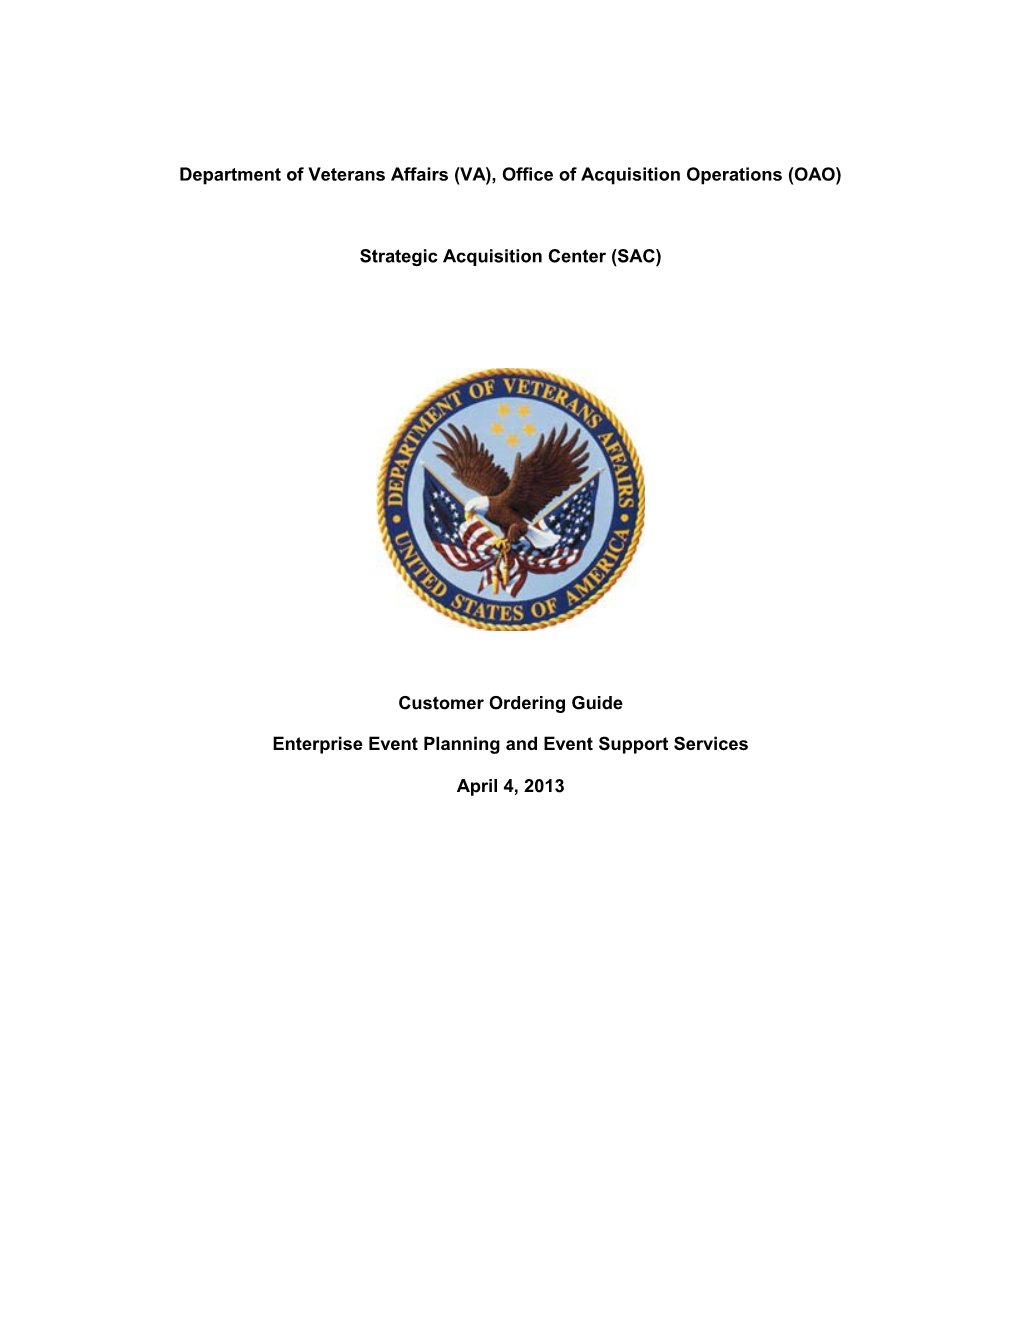 Department of Veterans Affairs (VA), Office of Acquisition Operations (OAO)